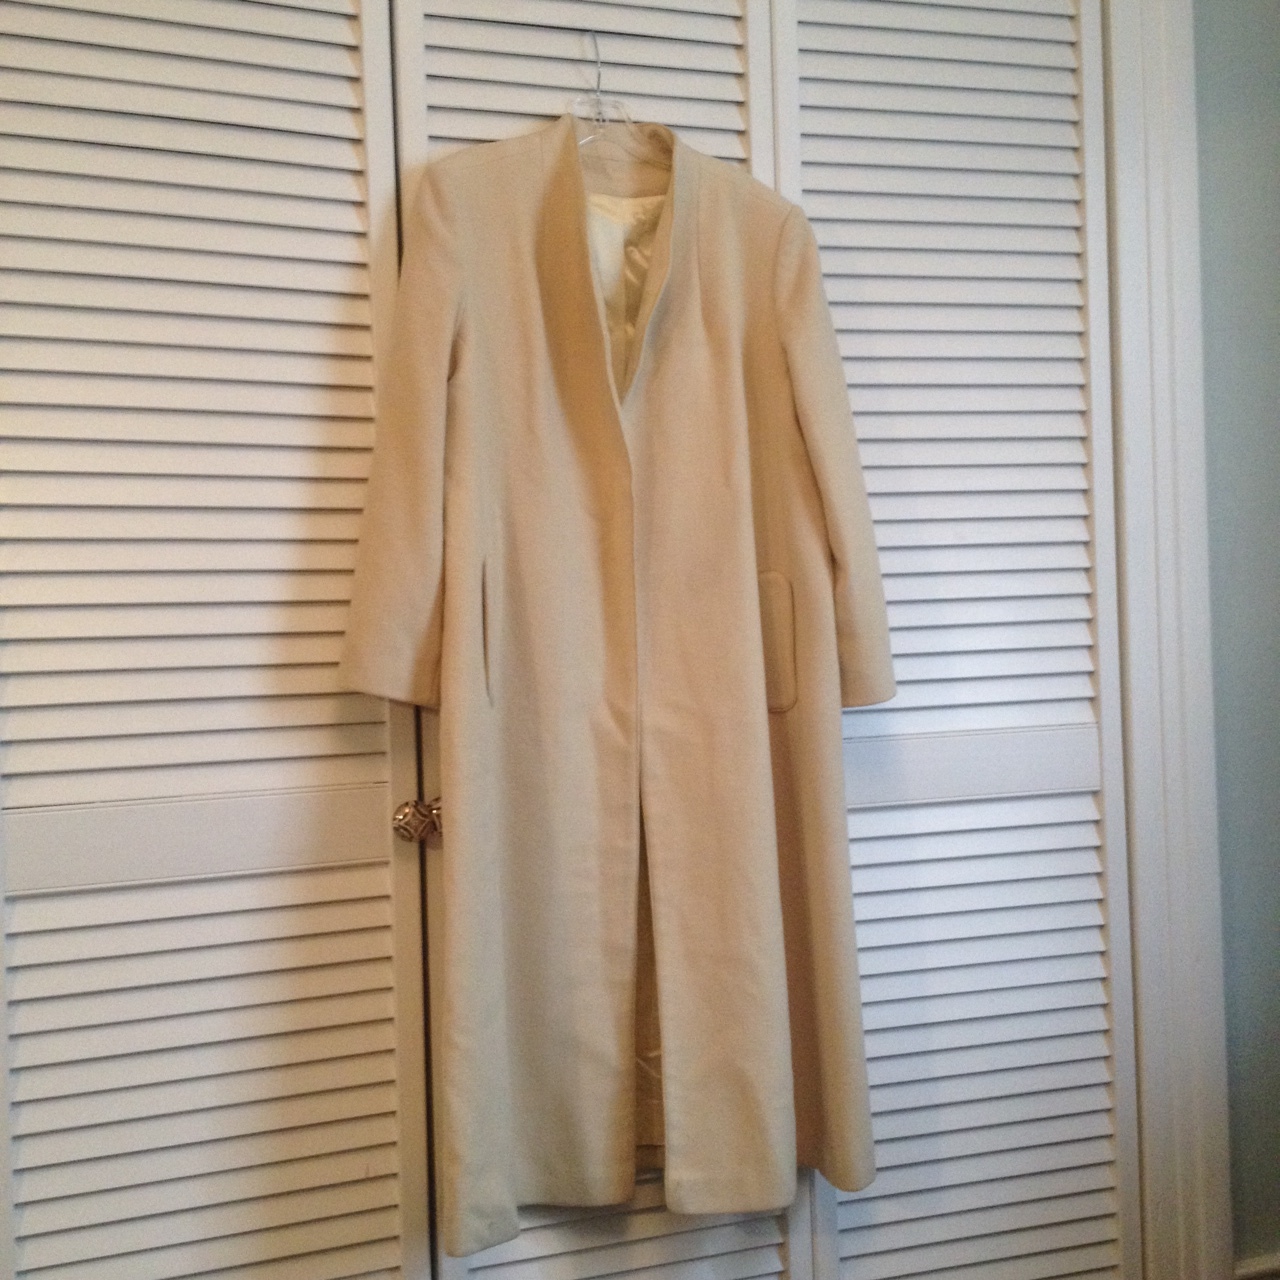 The Sewing Room Vintage Style Sewing and Fashion Blog - Vintage Coat ...